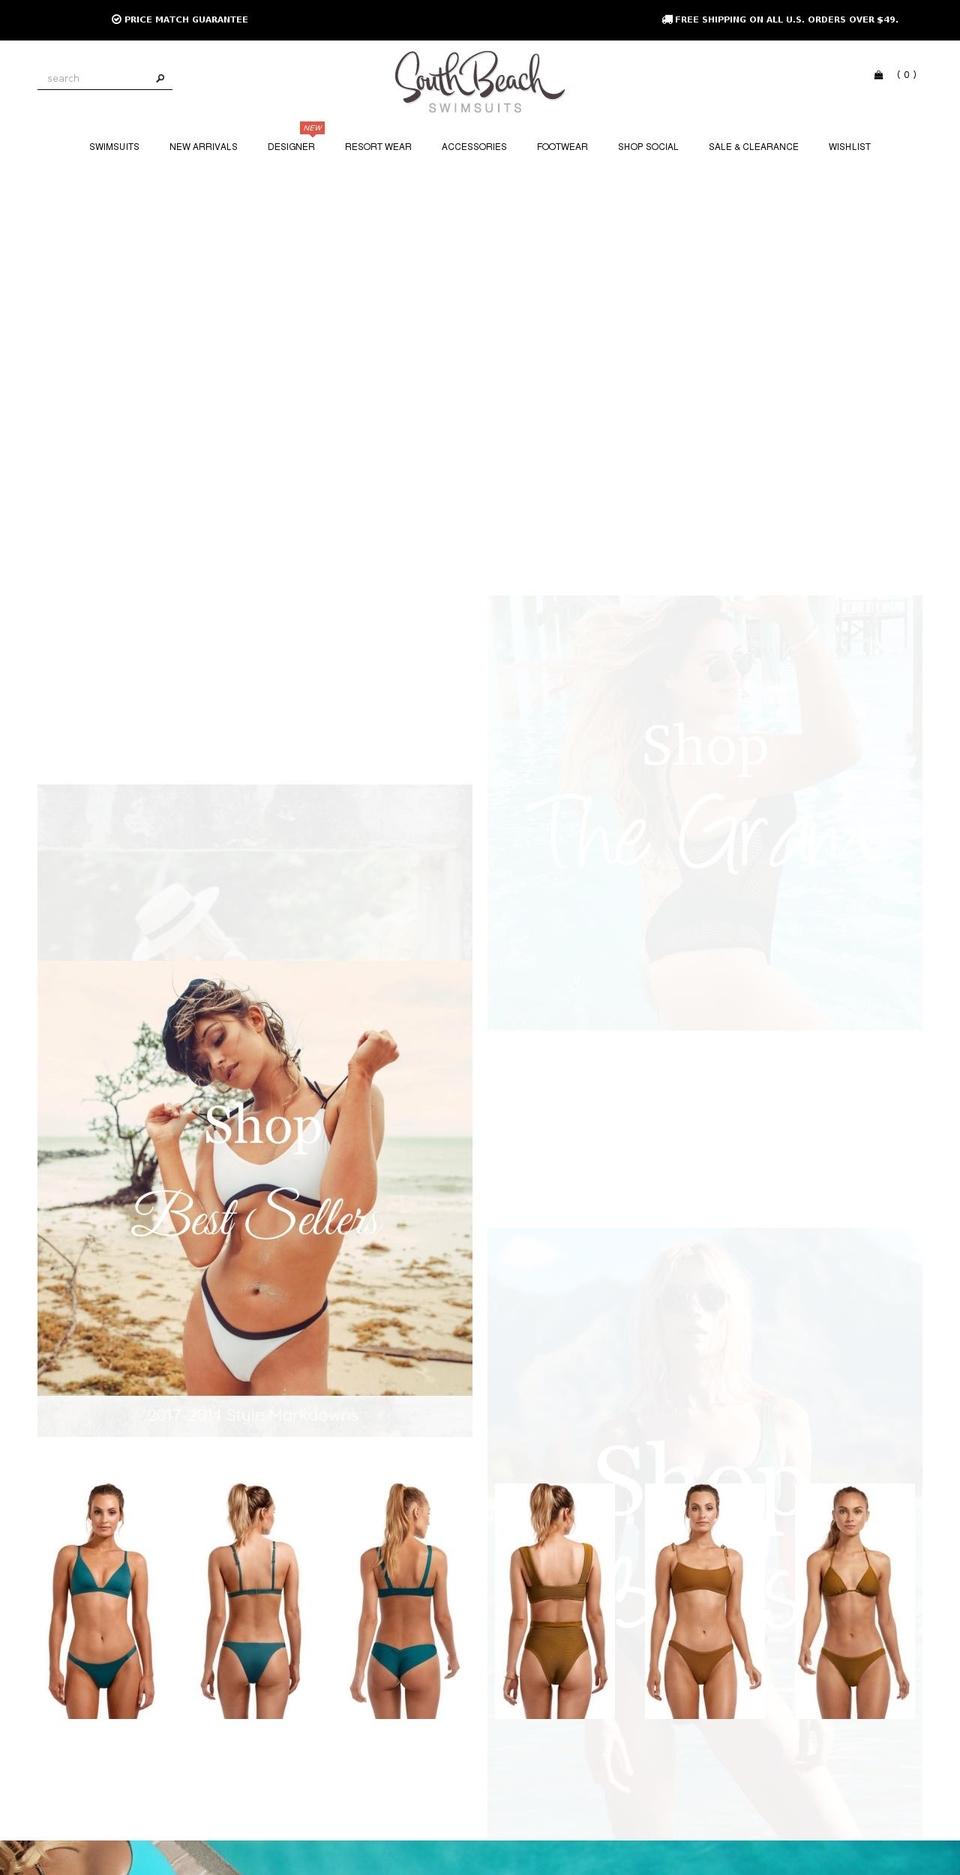 Made With ❤ By Minion Made - Updated Checkout Shopify theme site example southbeachspf.com